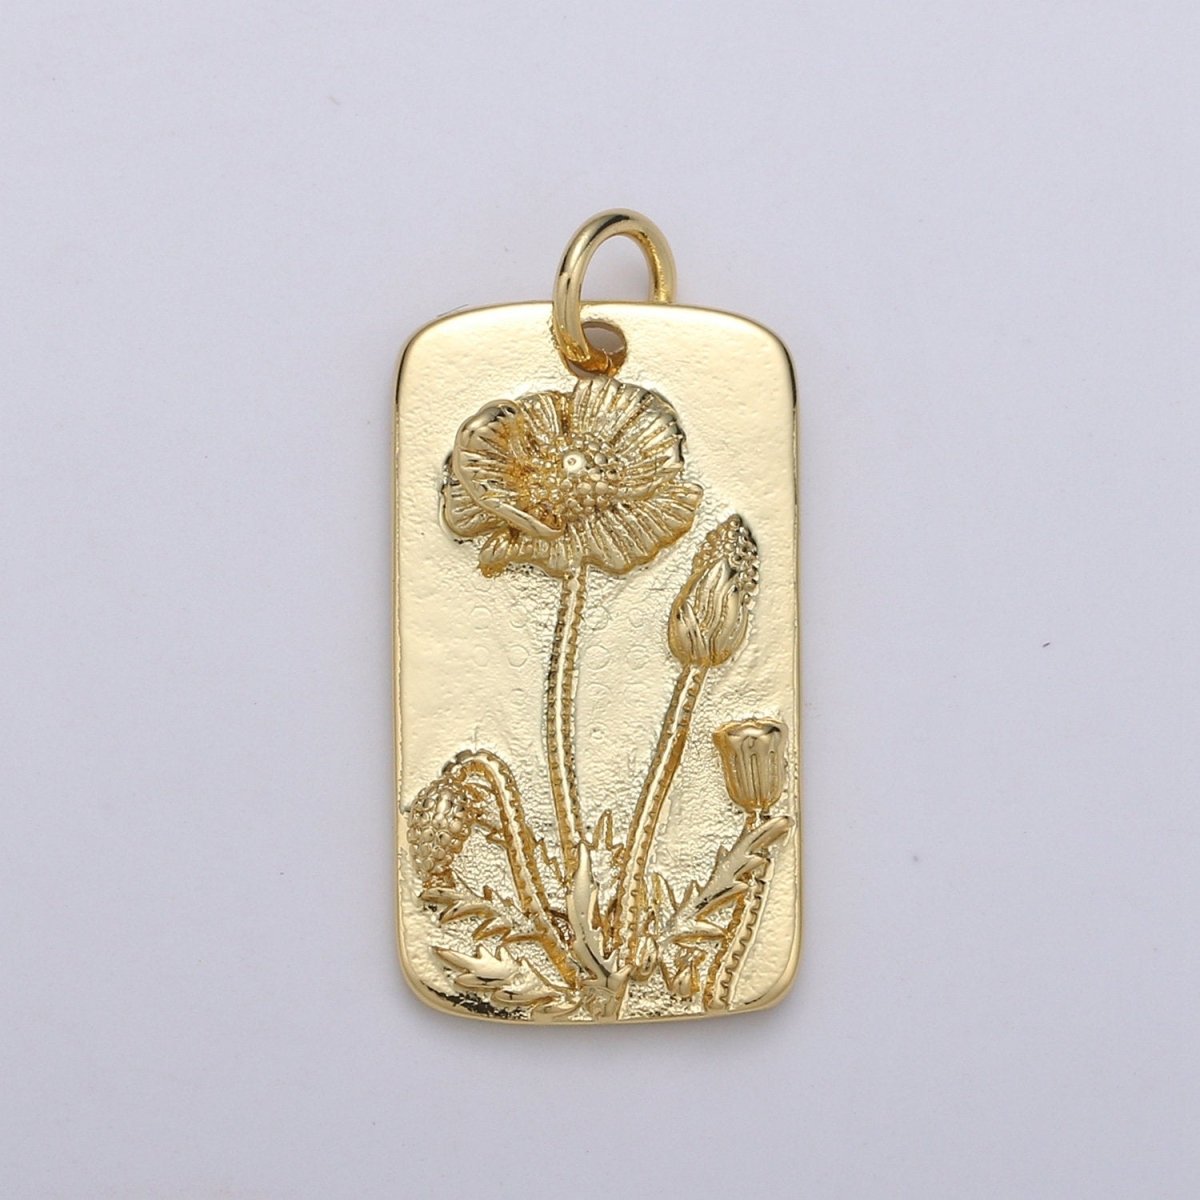 Poppy Flower Charms, Gold Tag Pendant, Dainty Poppy Charm, Small Wild Flower Charm for Necklace Floral Flower Tag Jewelry D-768 - DLUXCA